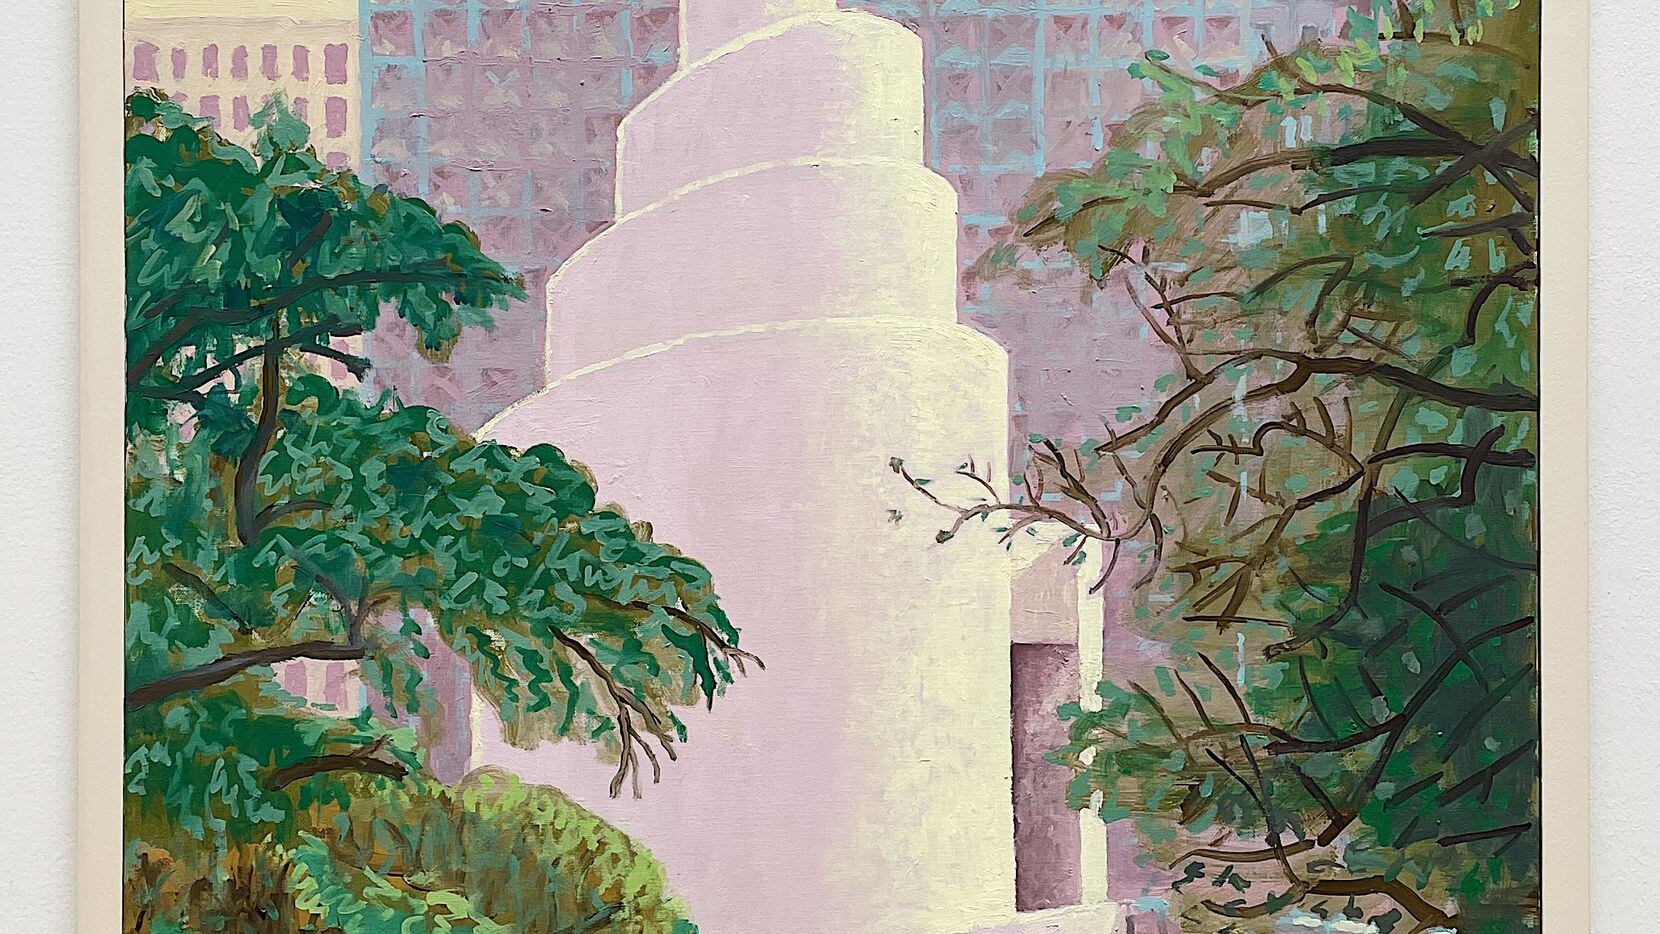 Thanks-Giving Square is among the Dallas landmarks featured in a series of paintings by...